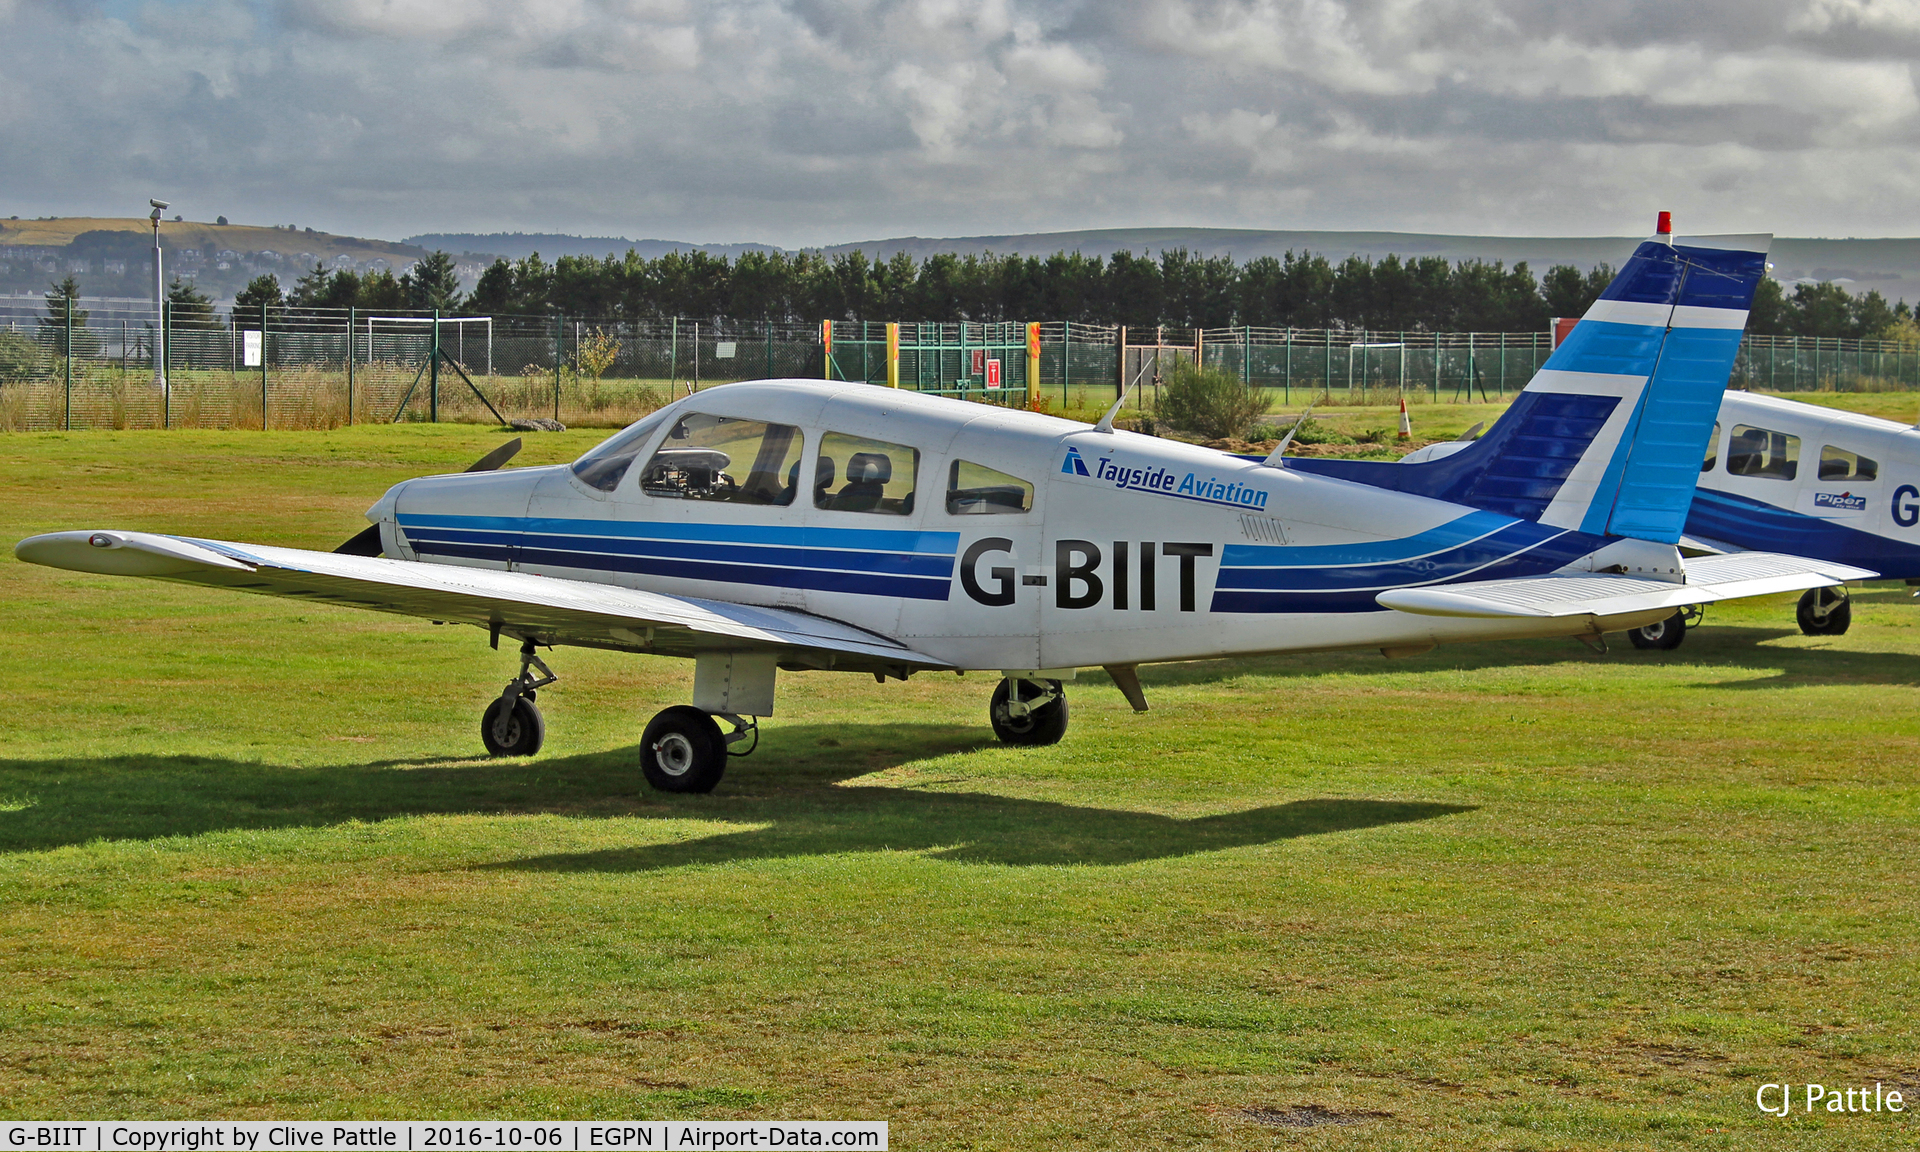 G-BIIT, 1980 Piper PA-28-161 Cherokee Warrior II C/N 28-8116052, Wearing its new Tayside Aviation colour scheme at Dundee EGPN